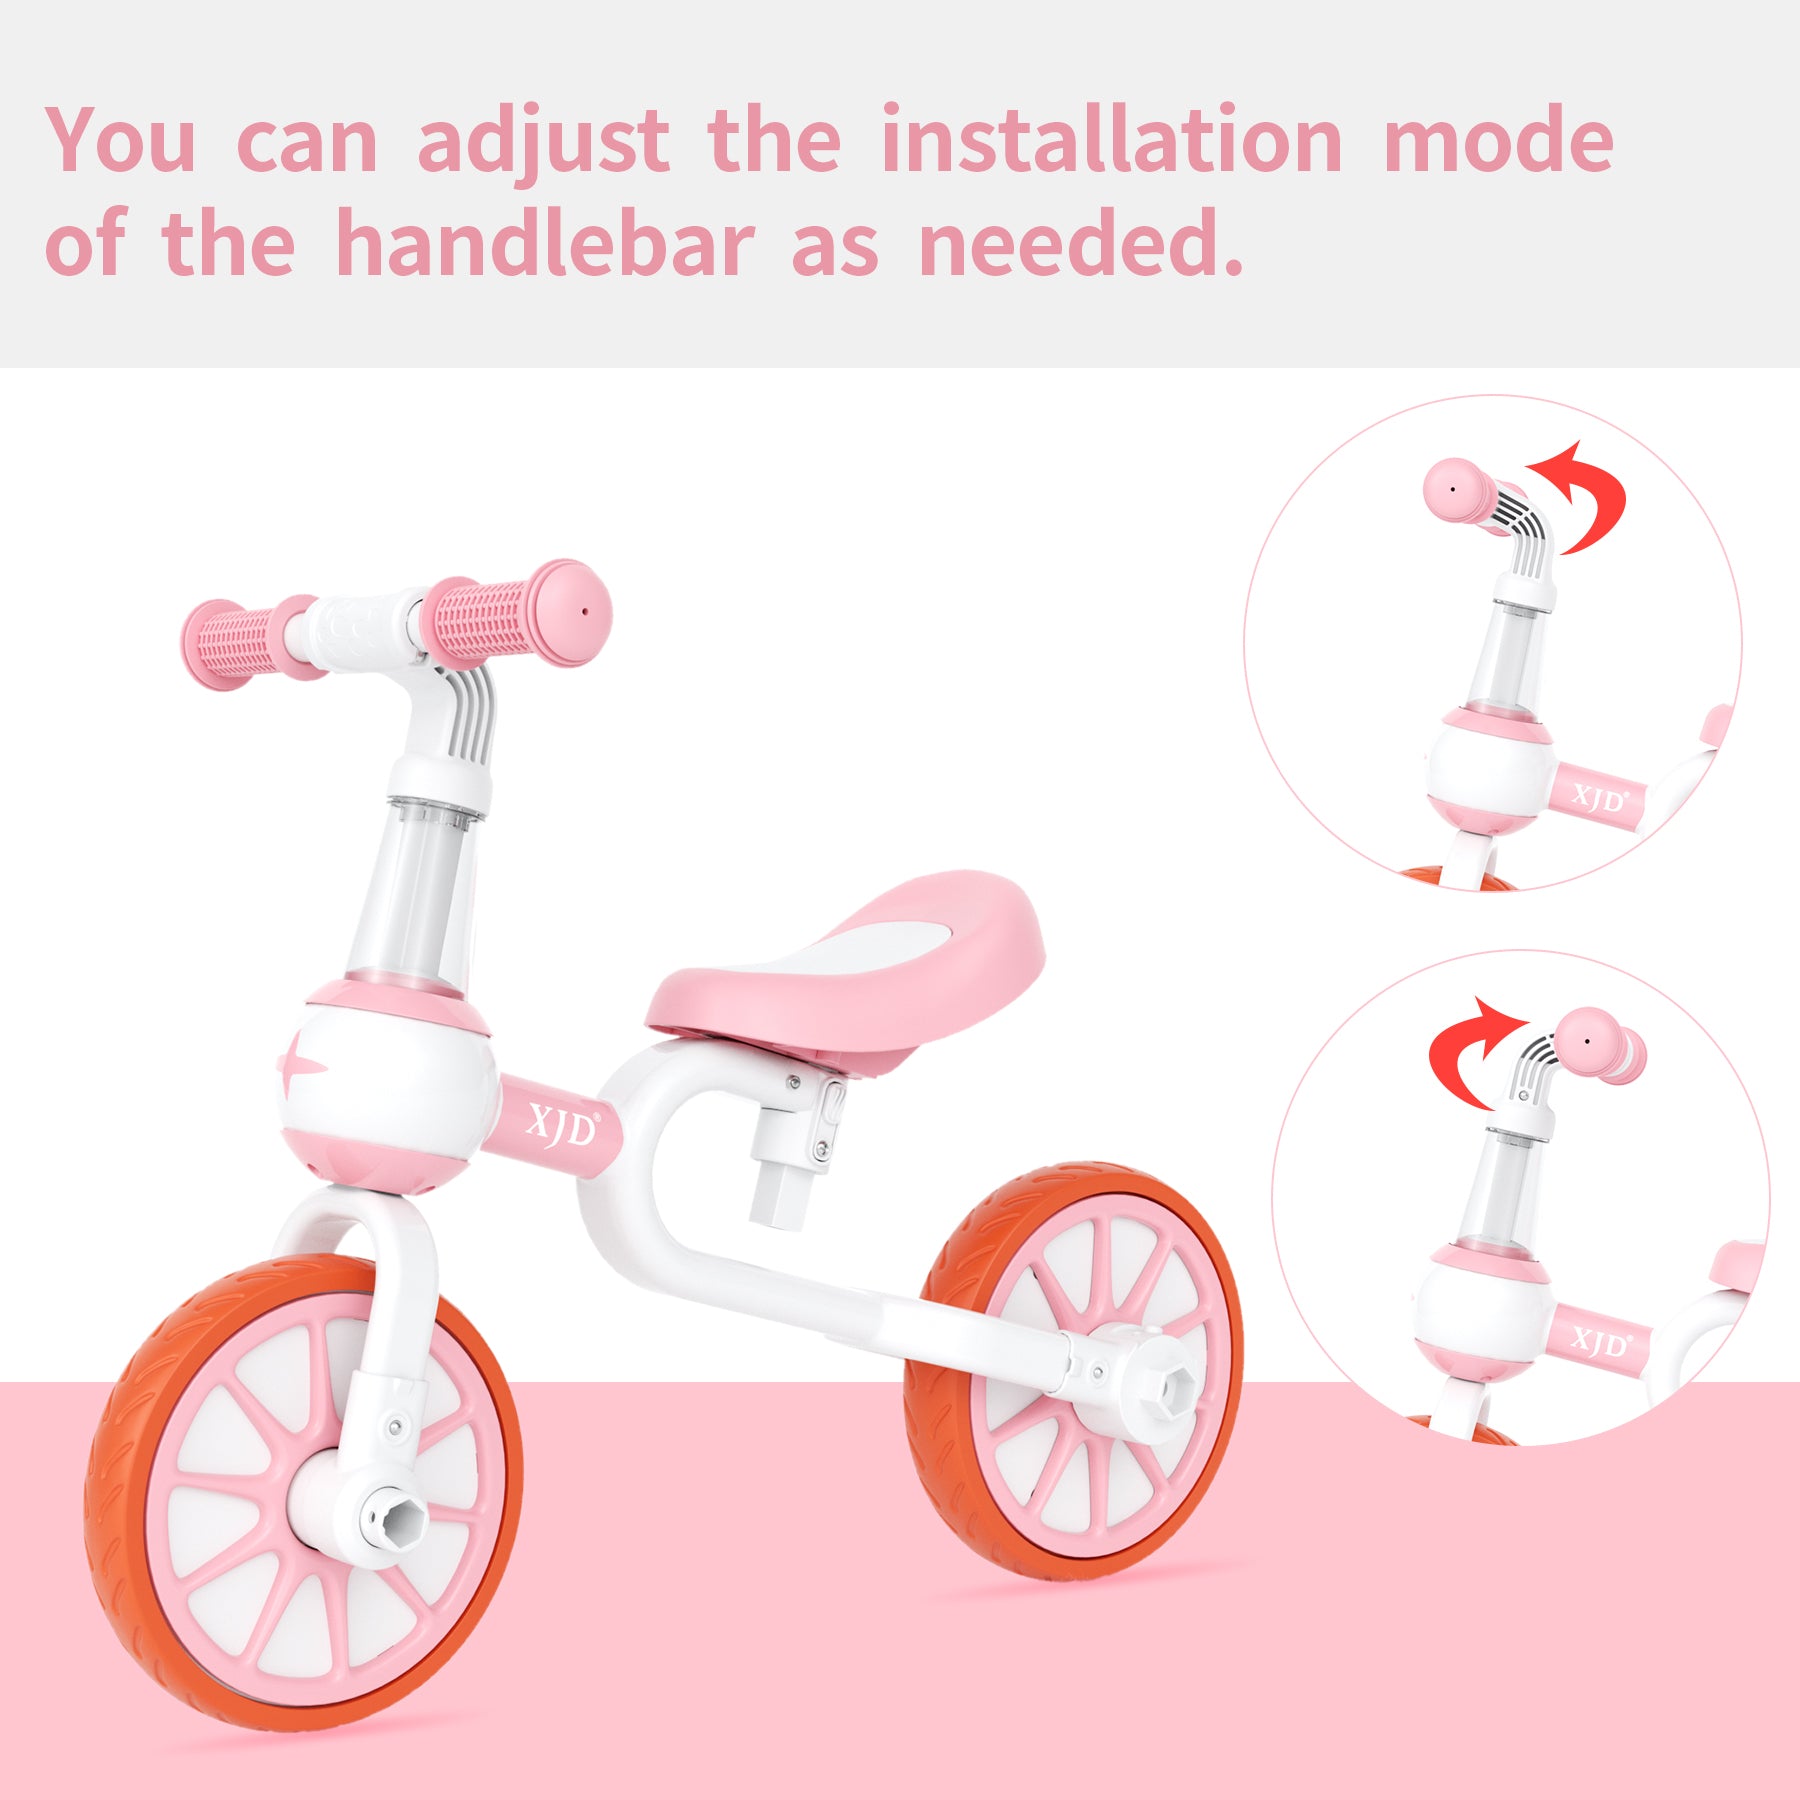 XJD 3 in 1 Toddler Tricycle Bikes, Toy Ride - Pink